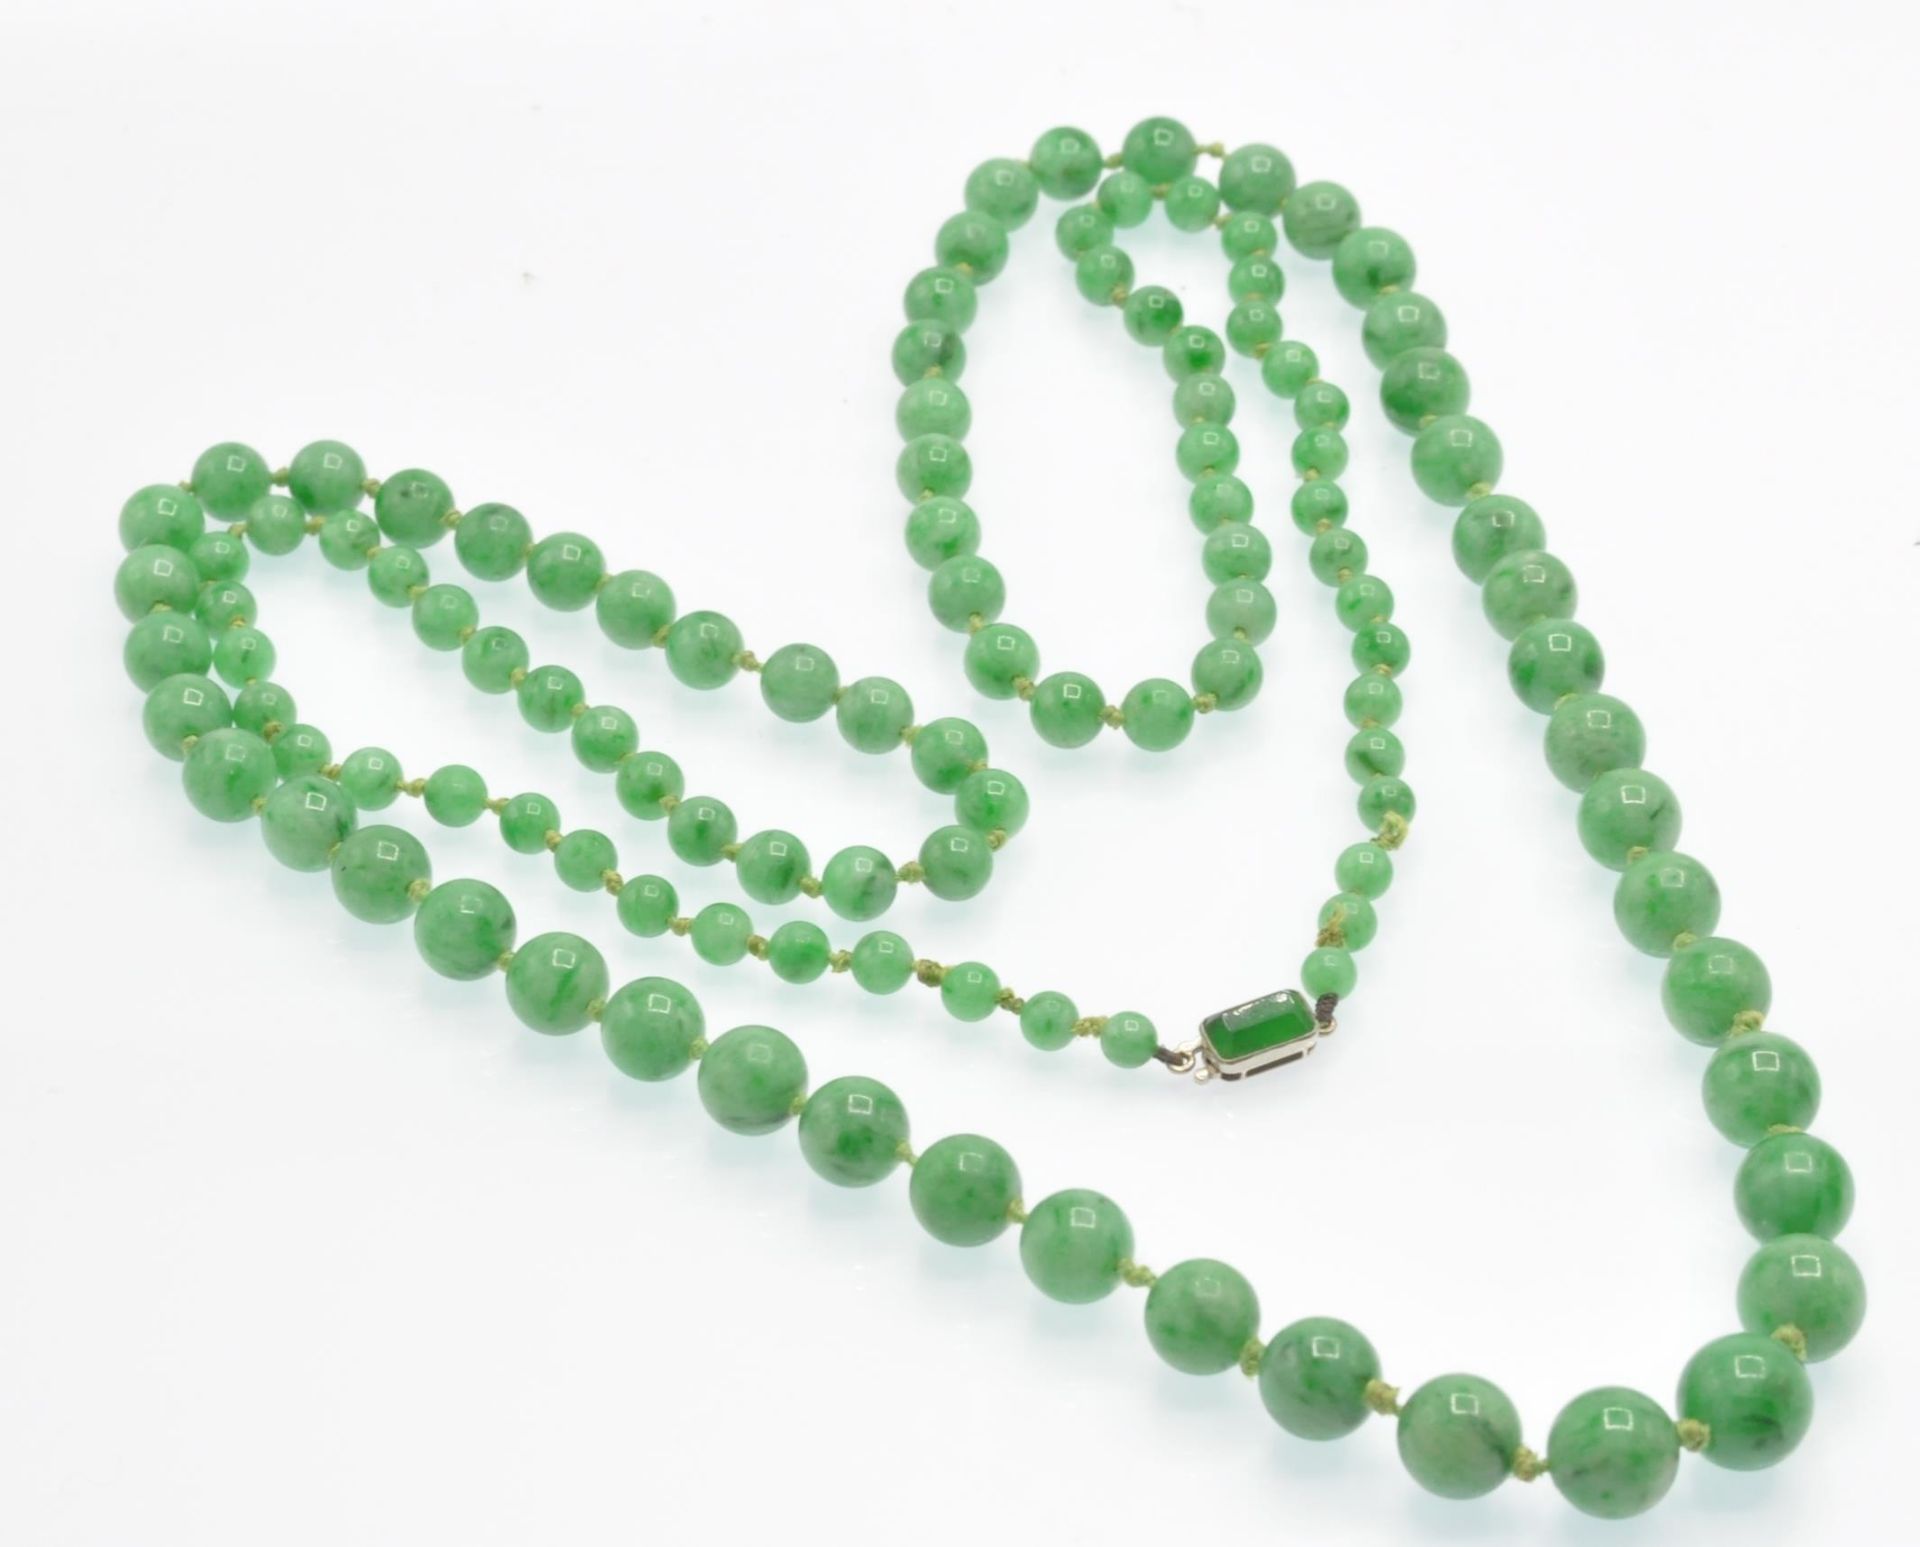 An Antique Jade Bead Necklace - Image 5 of 6